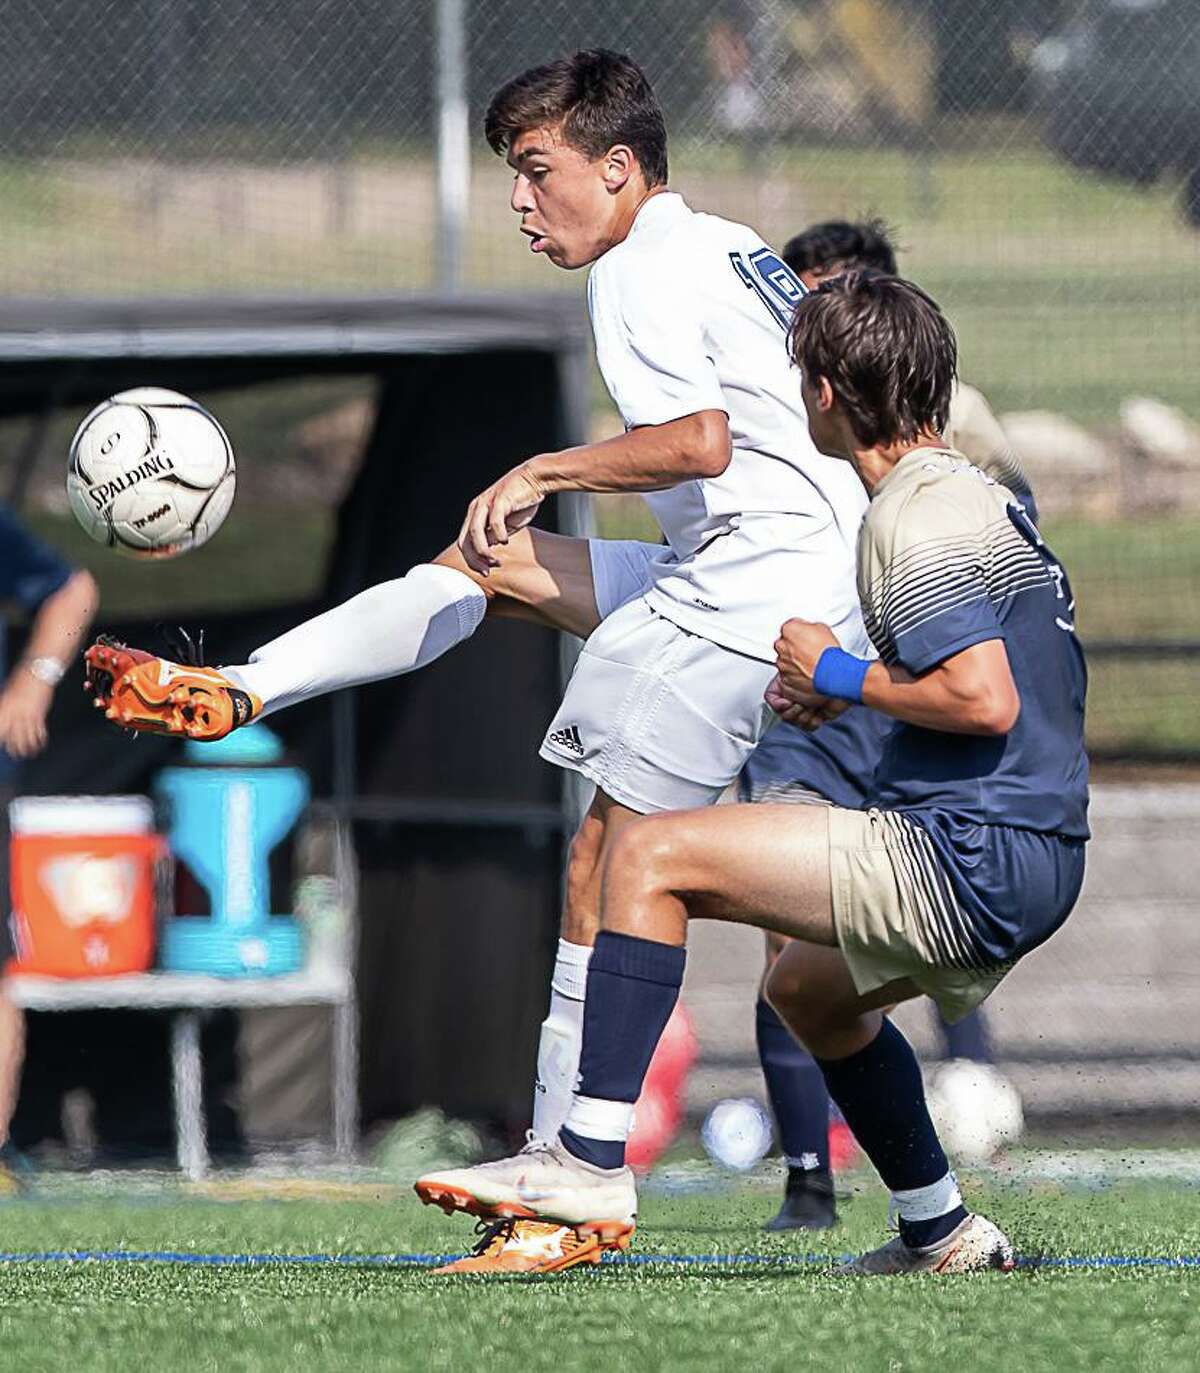 New Fairfield player Giovanni Linero works to get the ball up the field in the boys soccer match against Notre Notre Dame of Fairfield High School in Fairfield on Sept. 6, 2018.